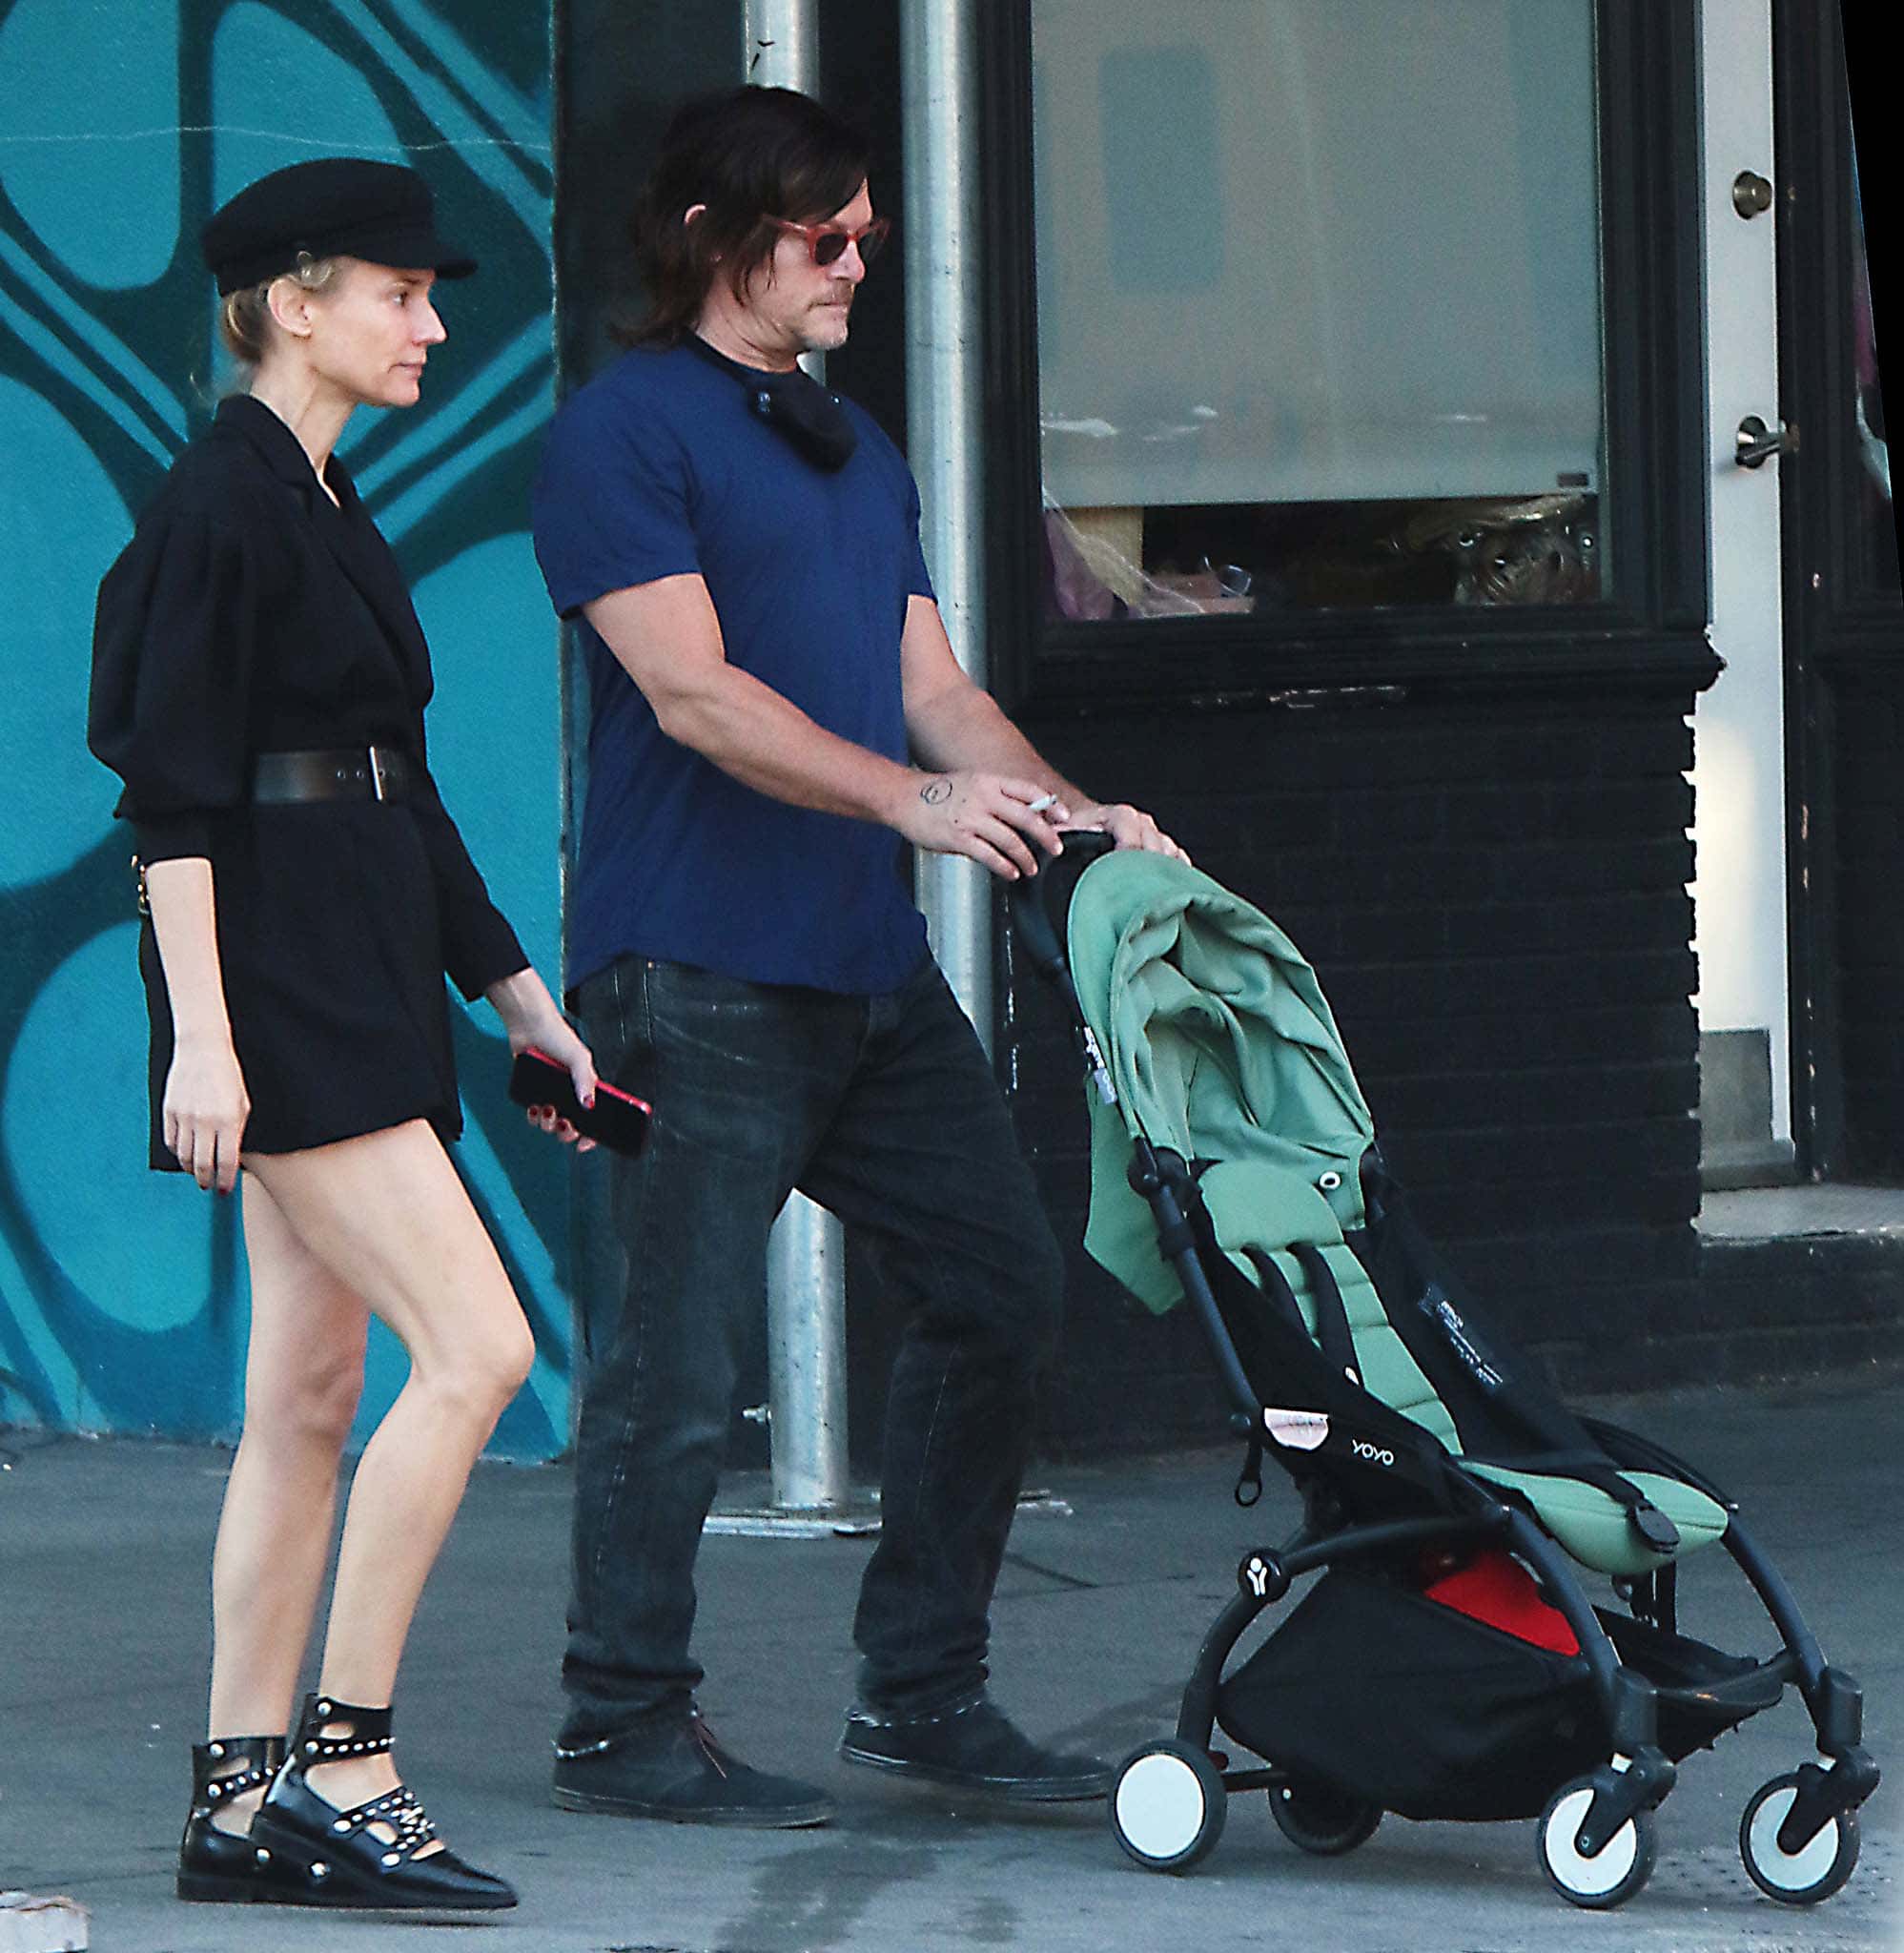 Diane Kruger and Norman Reedus push an empty stroller while out in New York City